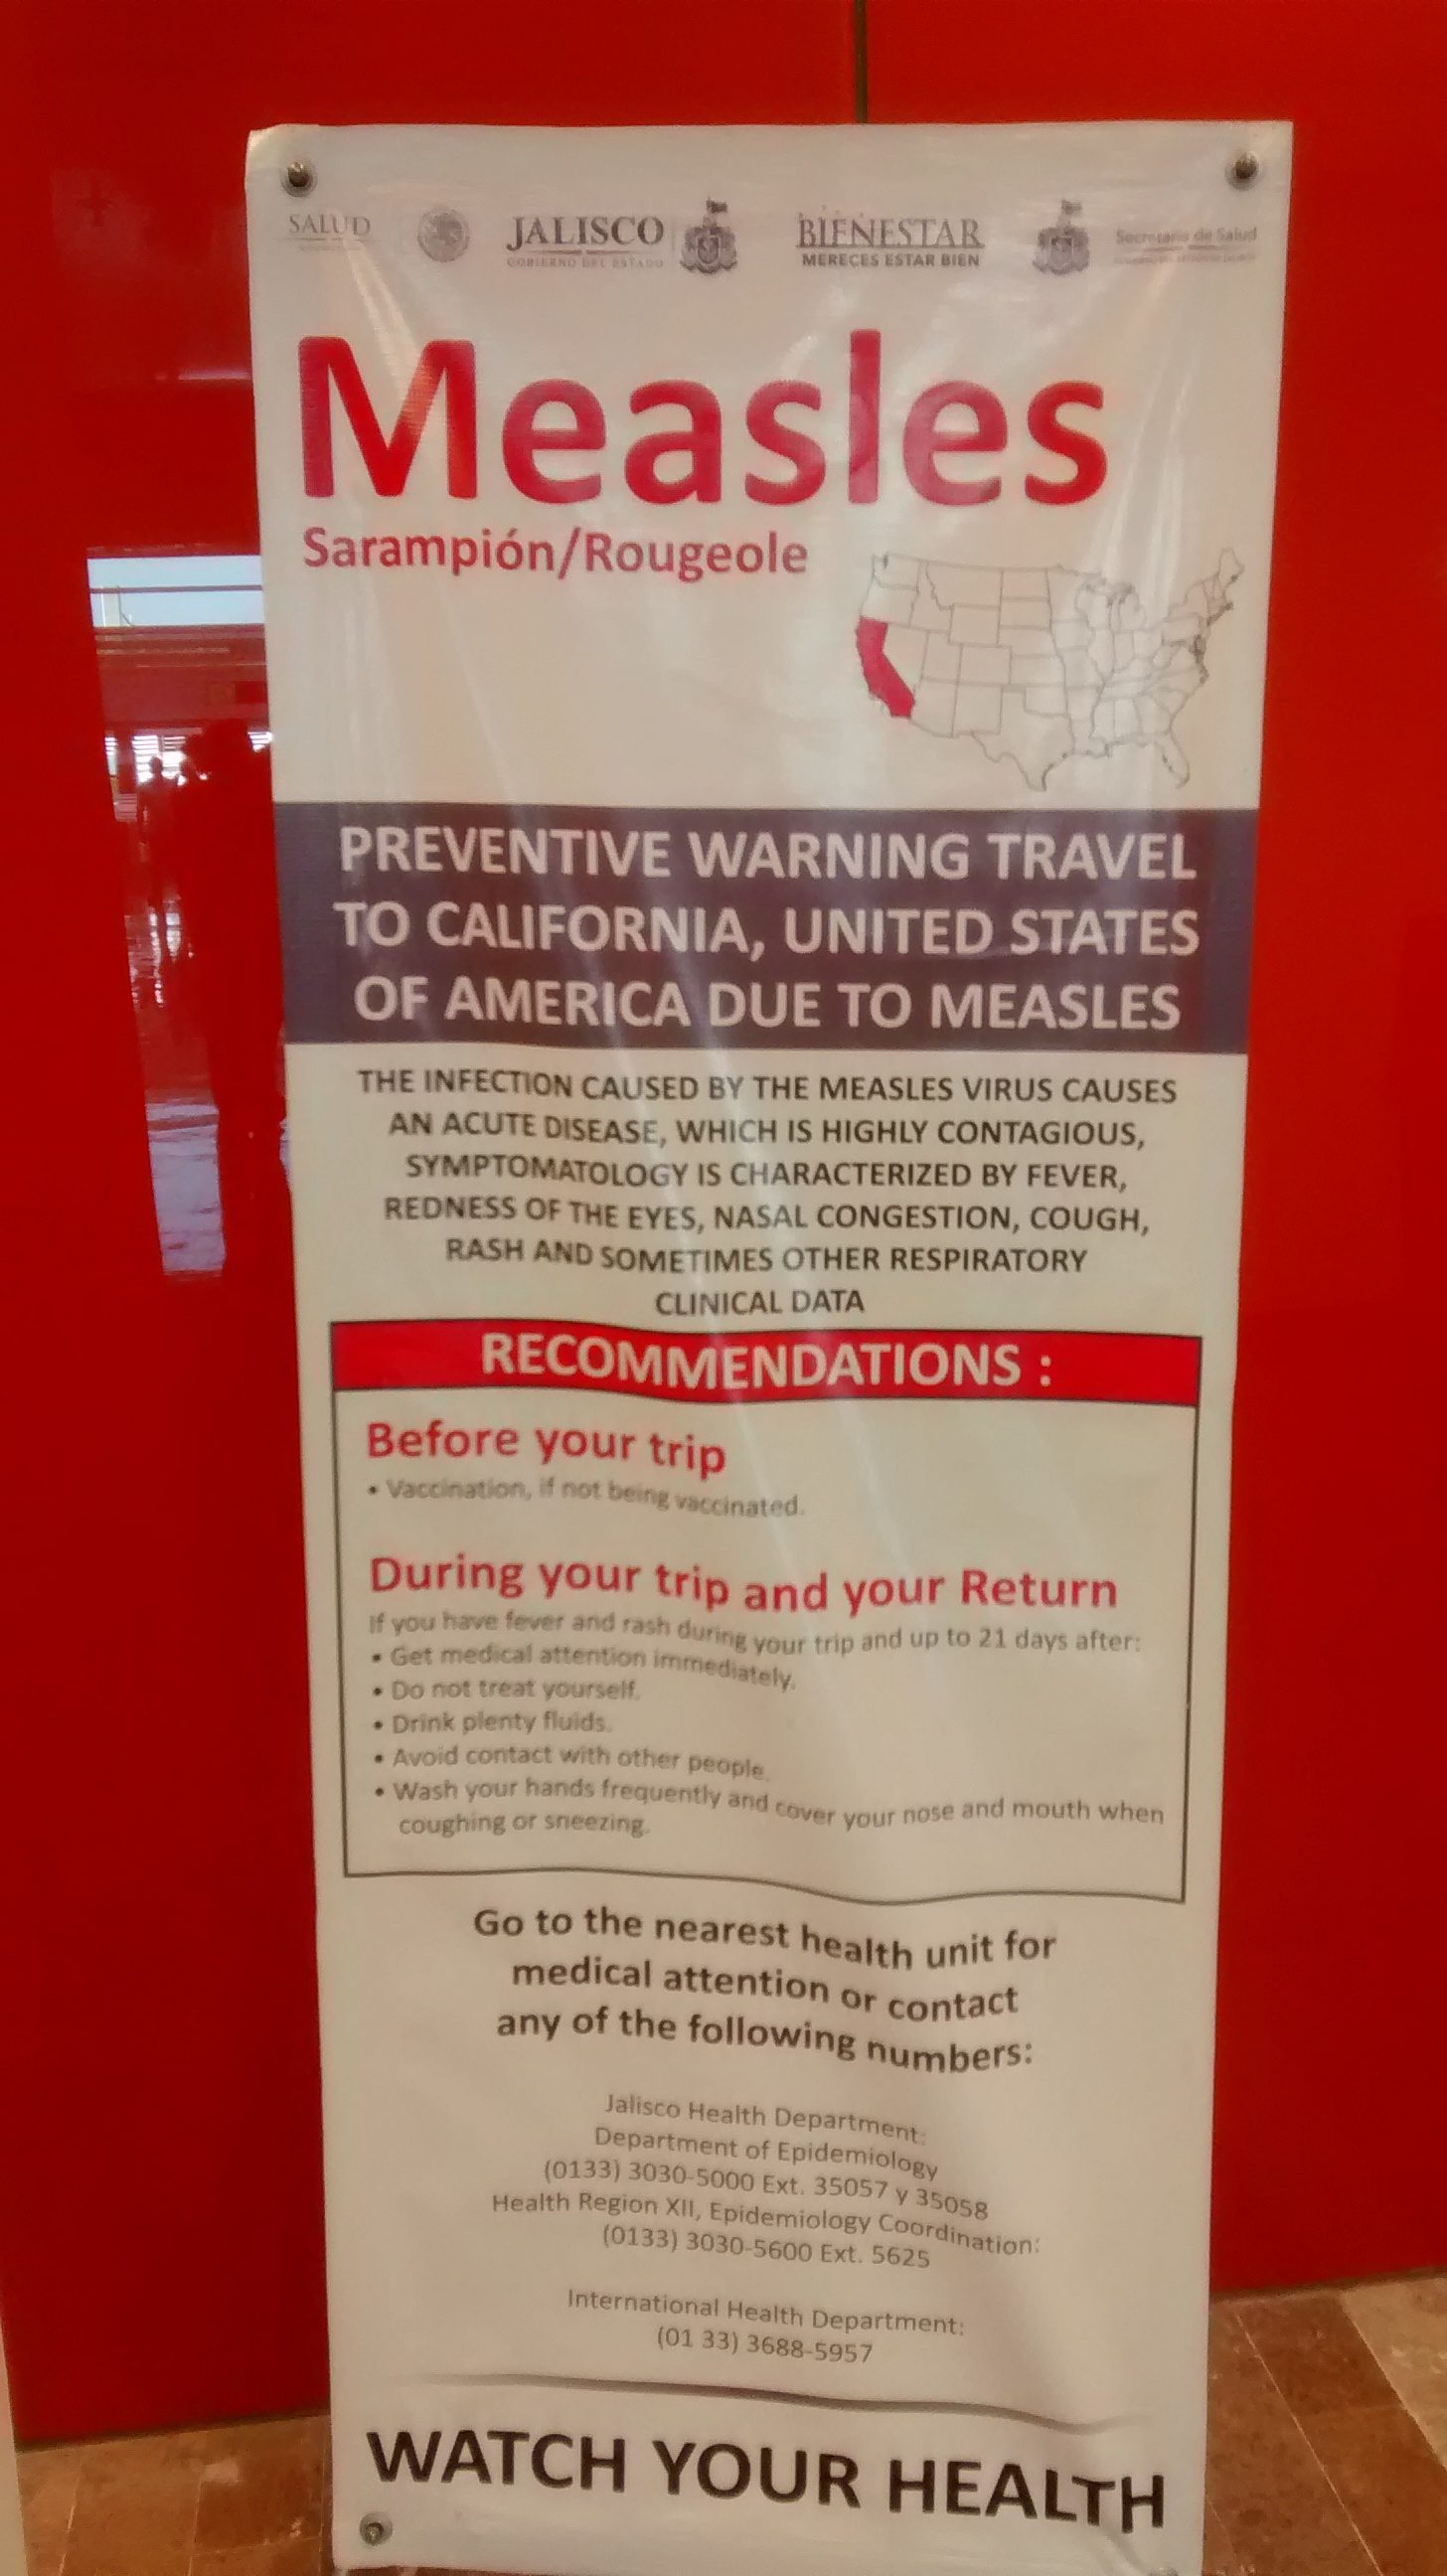 banner - Jacobs Measles SarampinRougeole Preventive Warning Travel To California, United States Of America Due To Measles The Infection Causo By The Meanies Vihue Causes An Ncted With Highly Contagio Symptomatology Olaracterized By Teve Dness Of The Natal